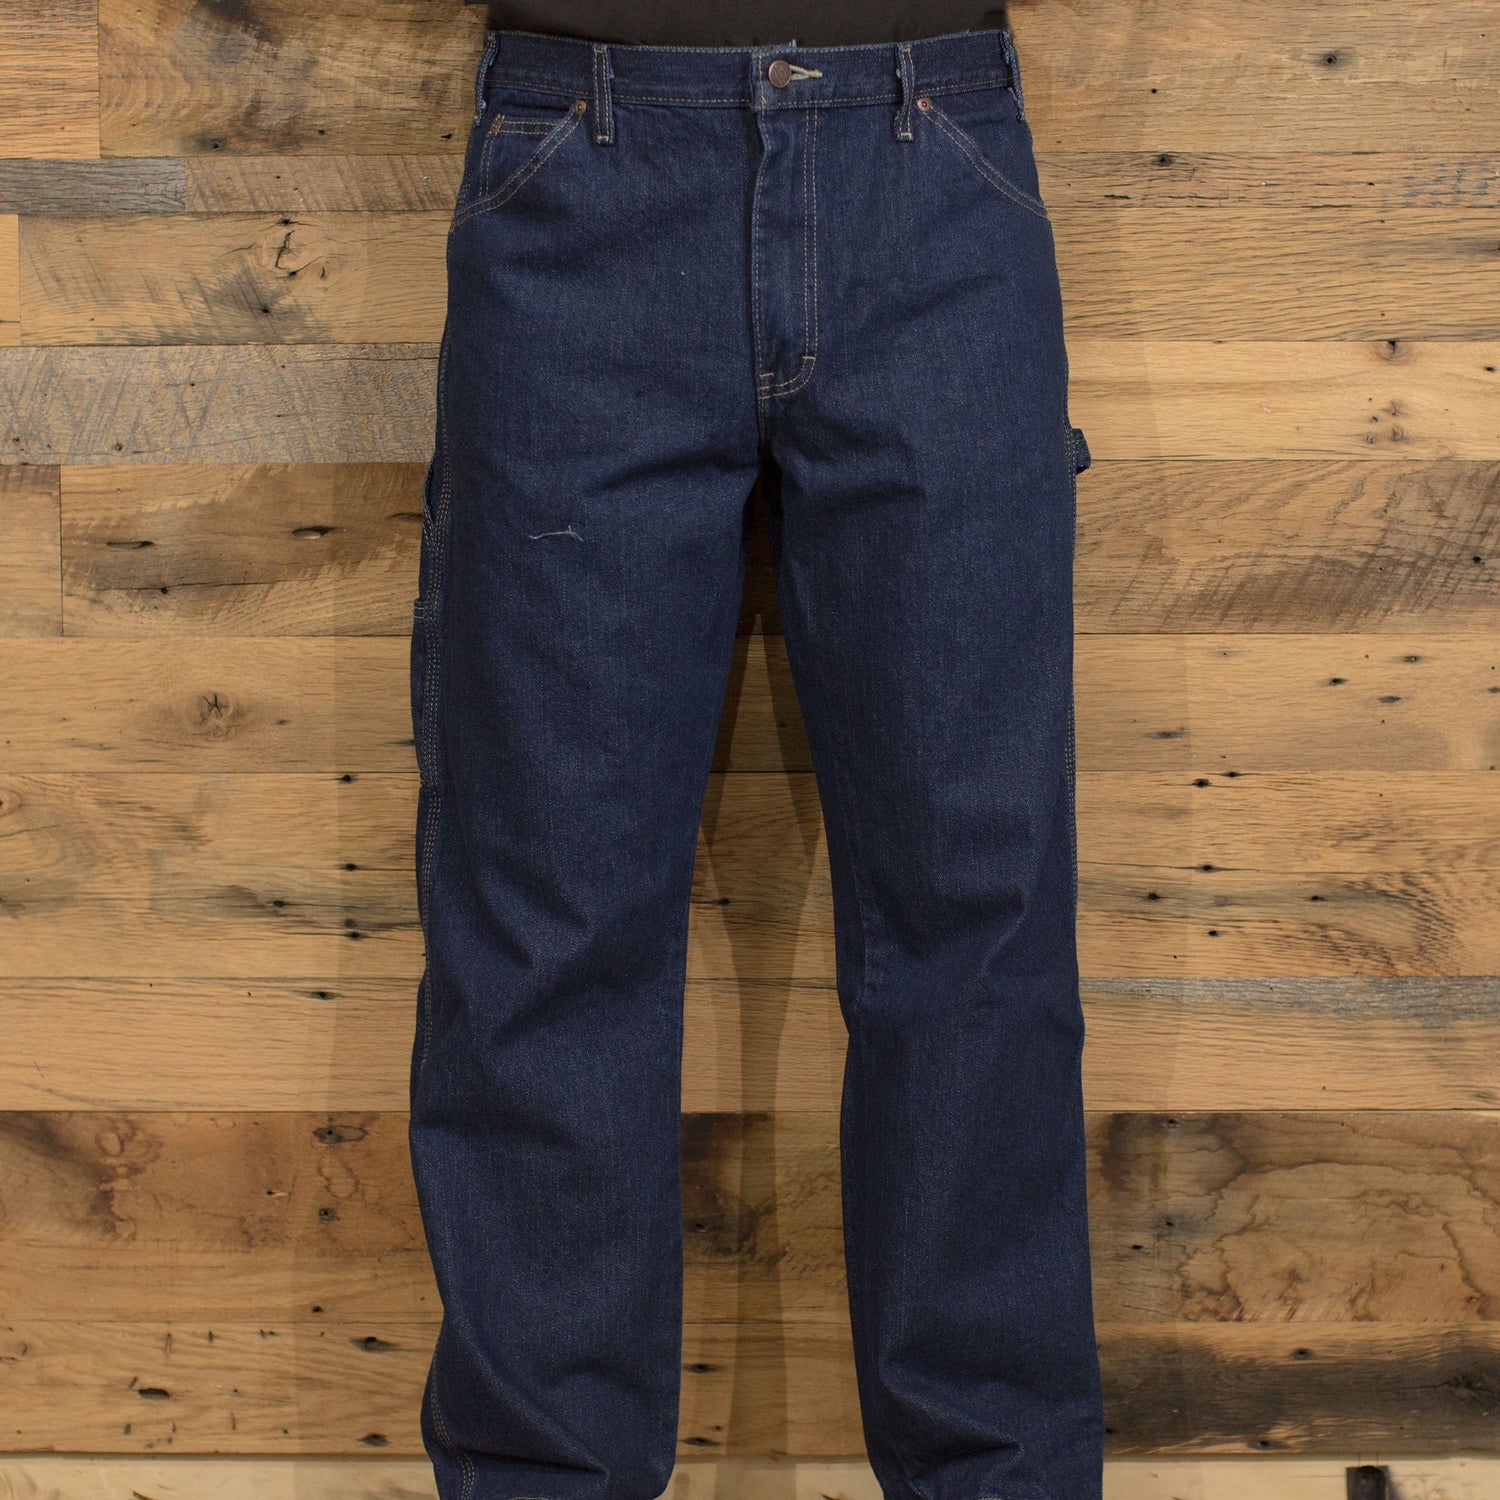 RELAXED FIT CARPENTER DENIM JEANS